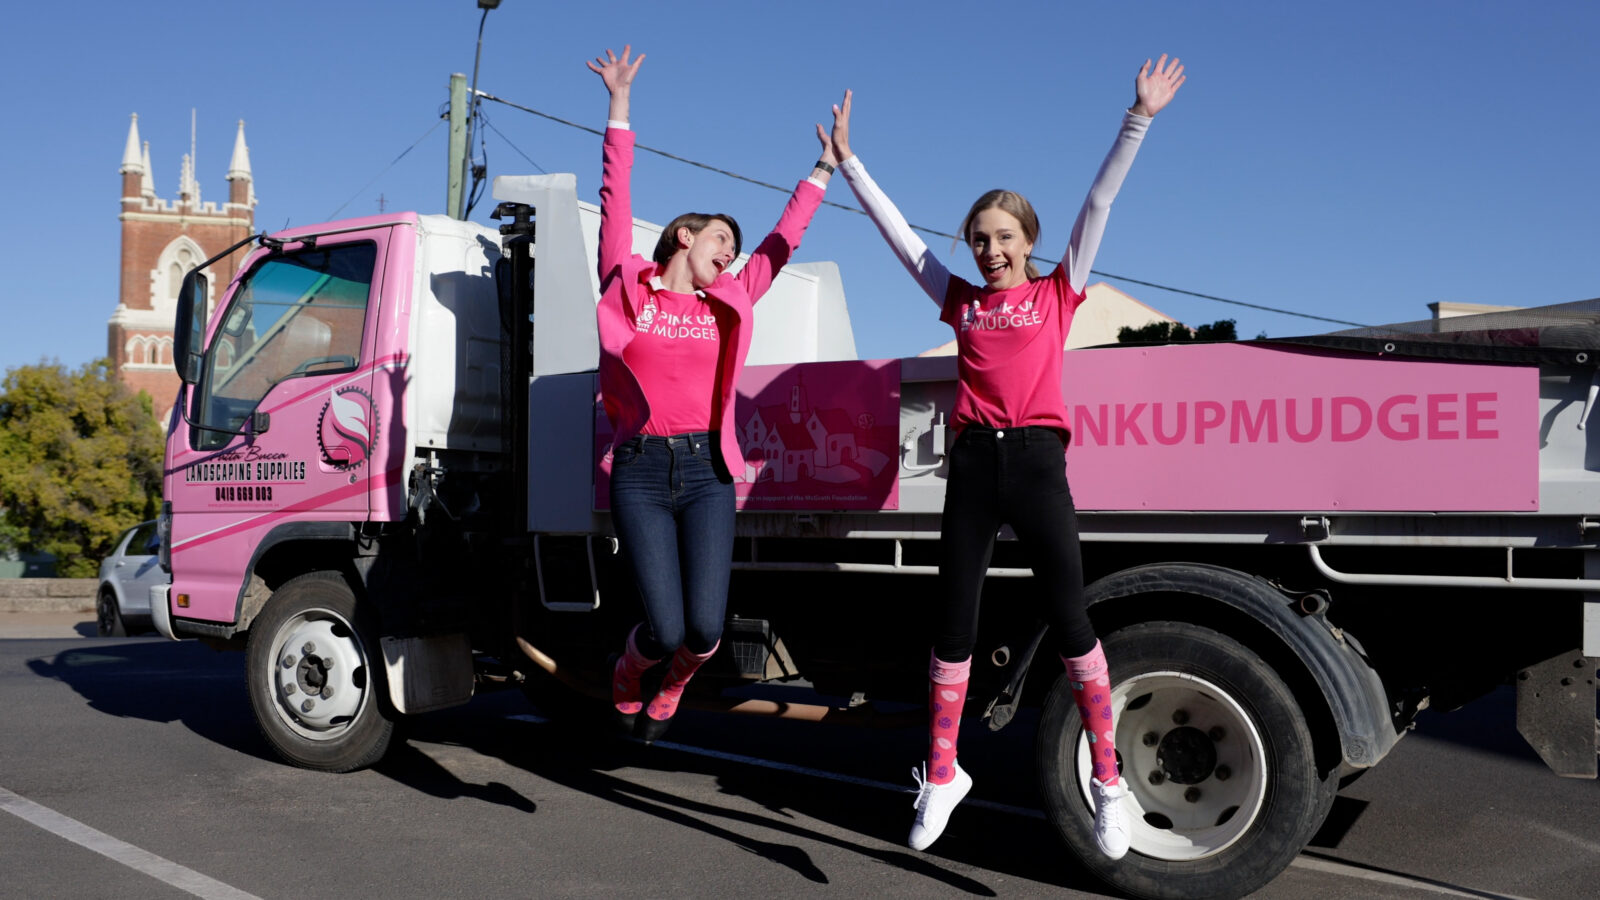 Pink Up Mudgee fundraisers jumping in the air in front of pink truck.